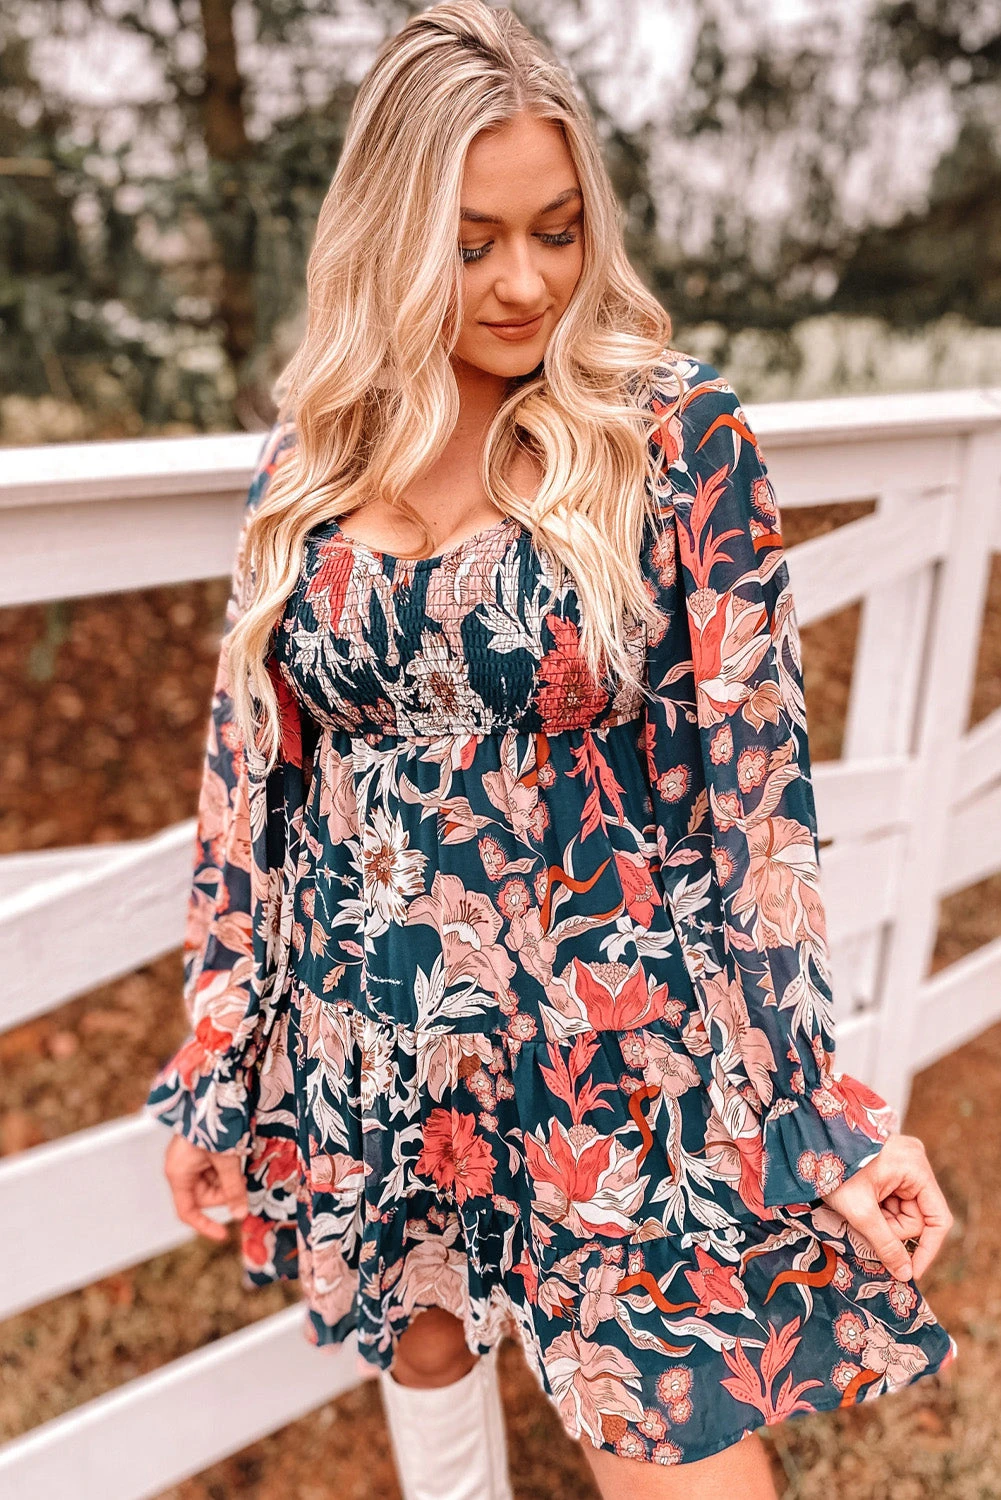 Confidence Abounds Floral Tiered Mini Dress $ 41.99 - Evaless